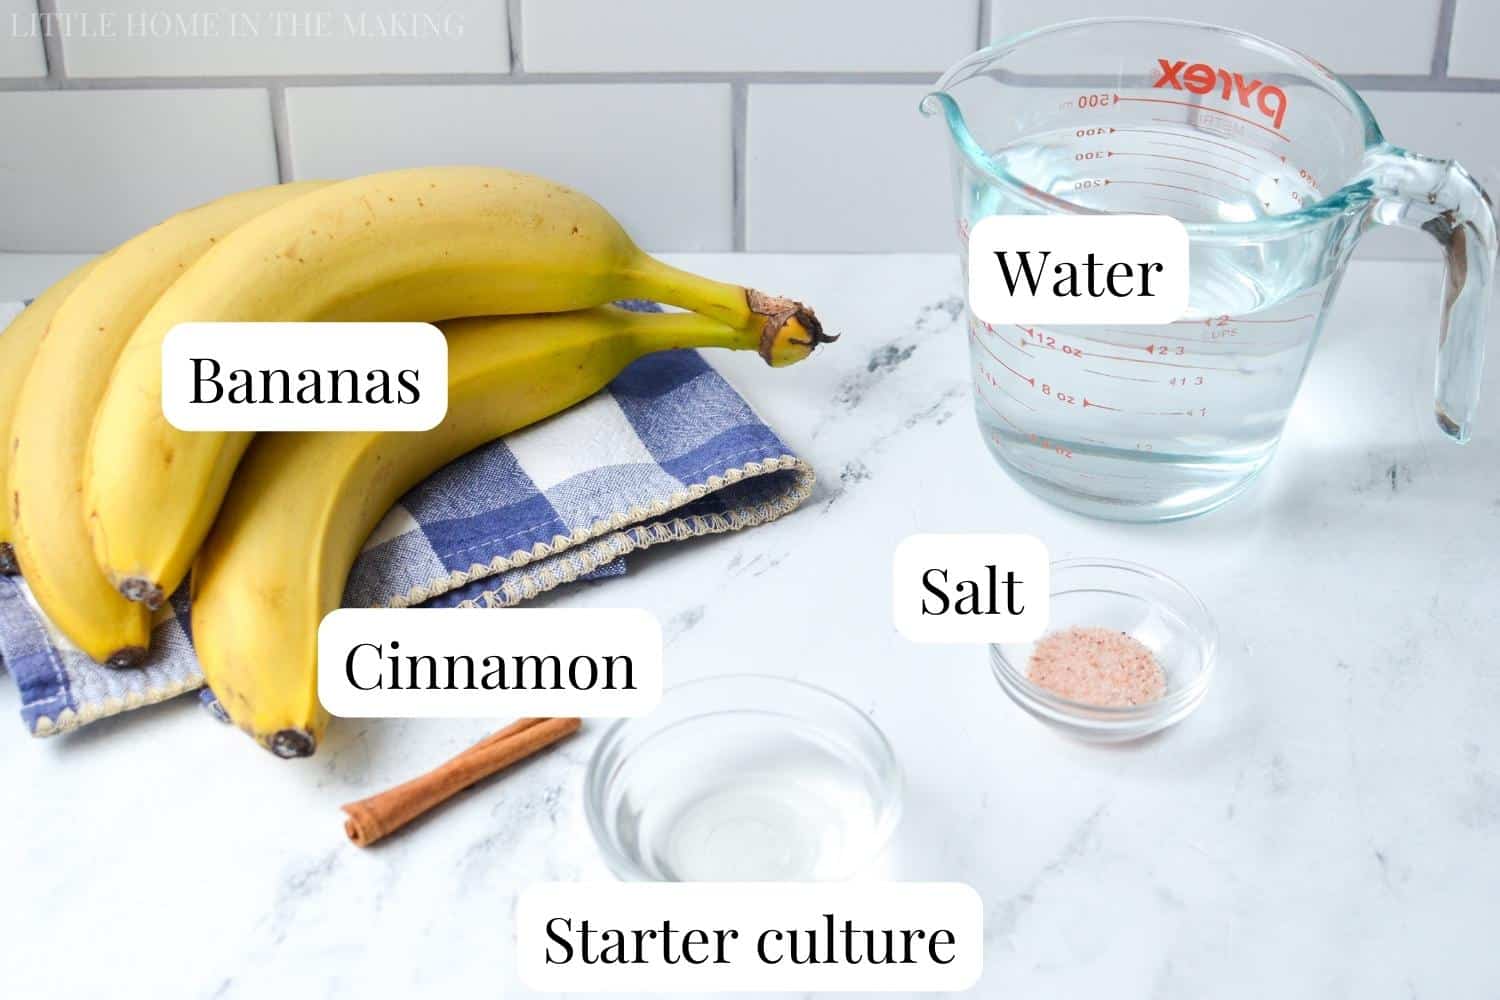 The ingredients needed to ferment bananas: including bananas, cinnamon stick, salt, starter culture, and water.